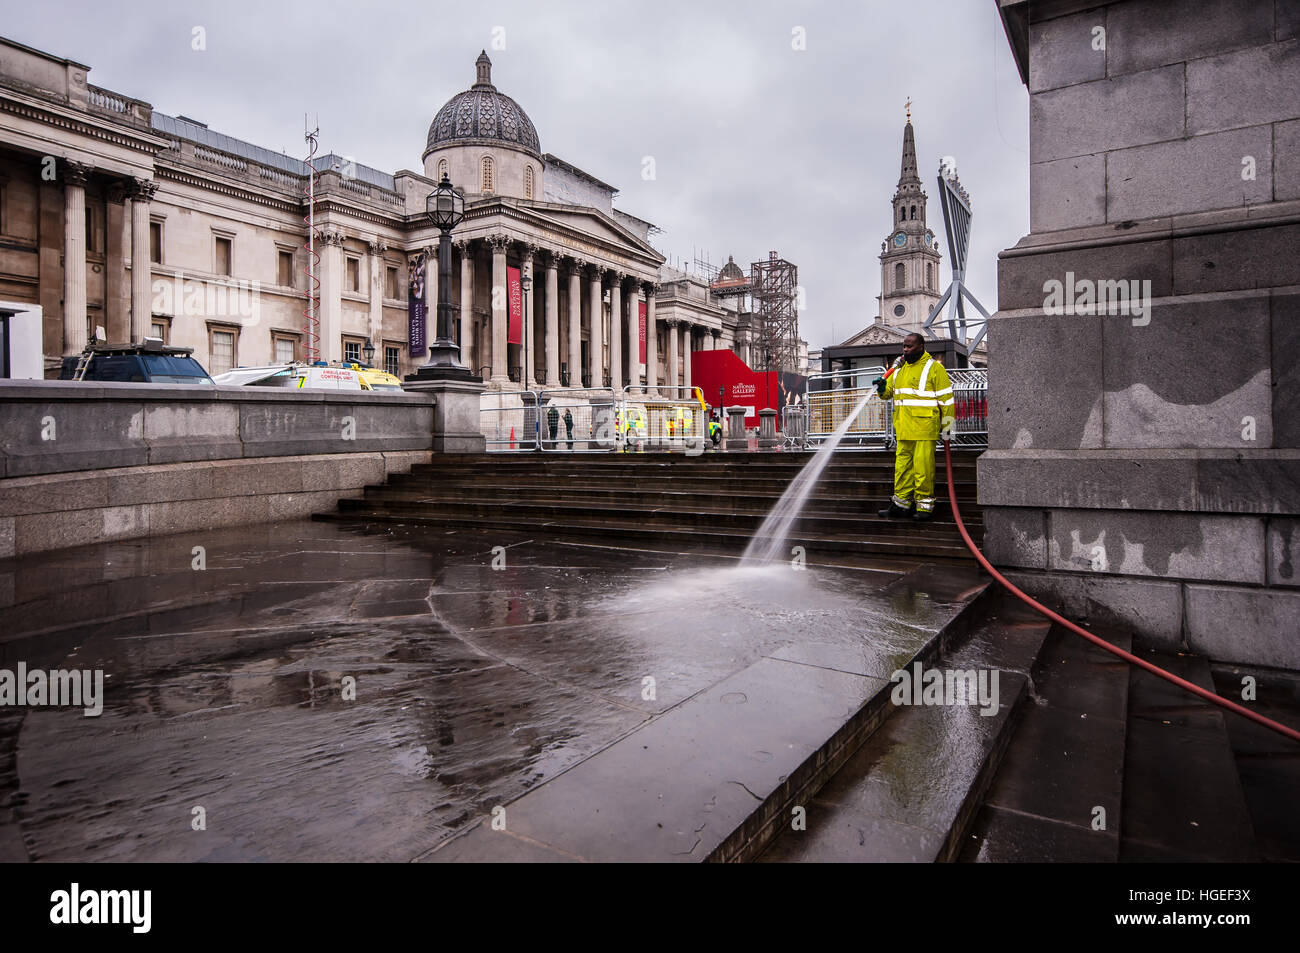 Clearing up Trafalgar Square on New Year's Day after the New Year's Eve celebrations in front of the National Gallery Stock Photo